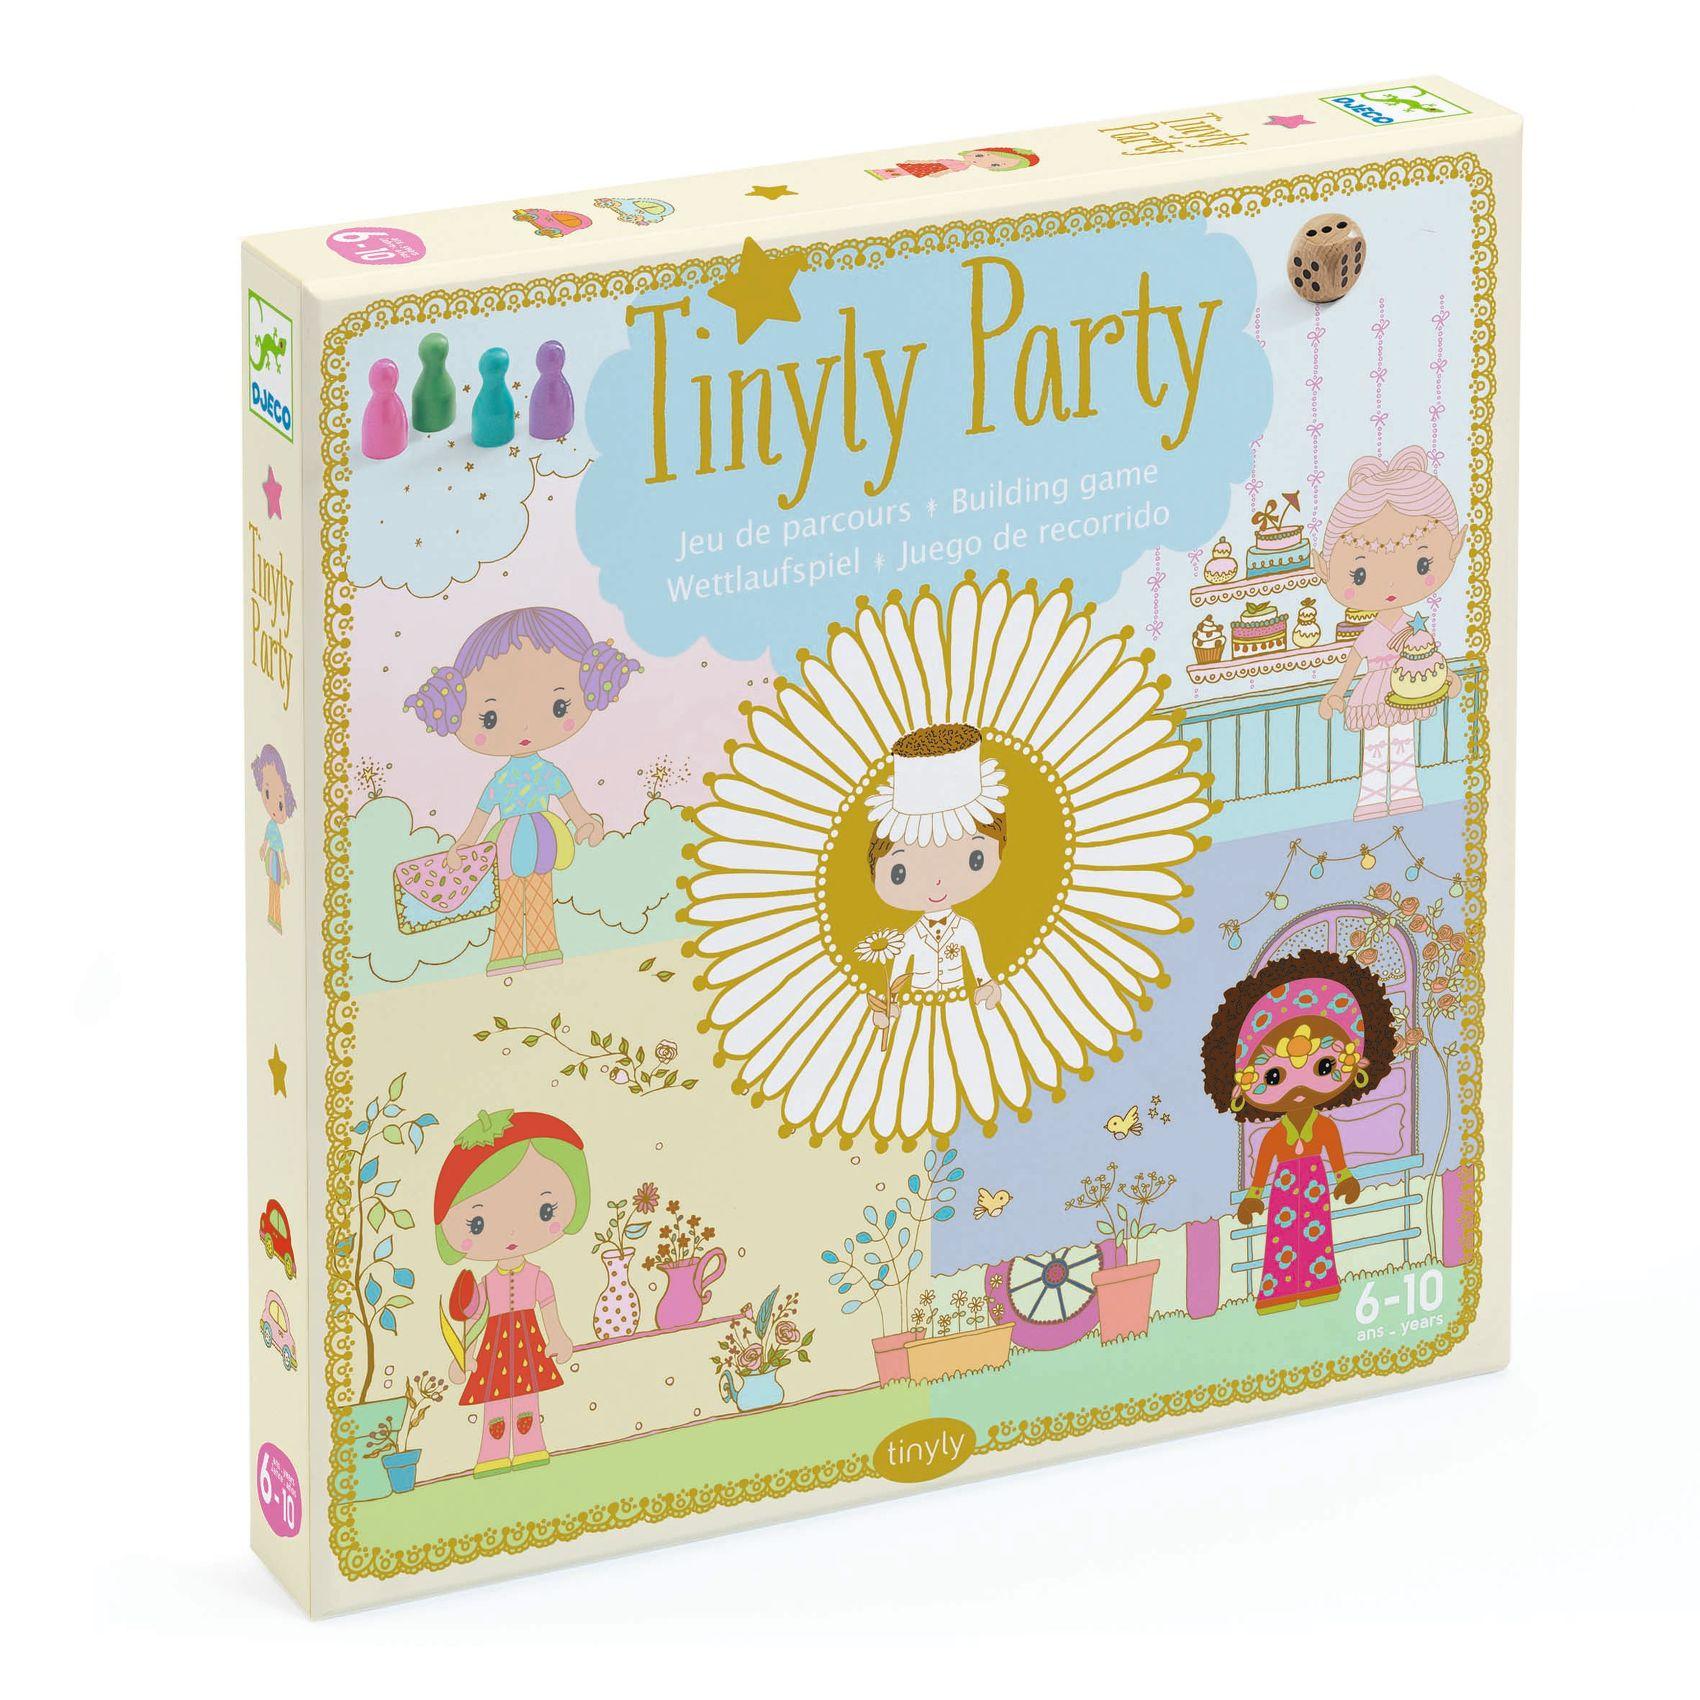 Tinyly Party Board Game by Djeco